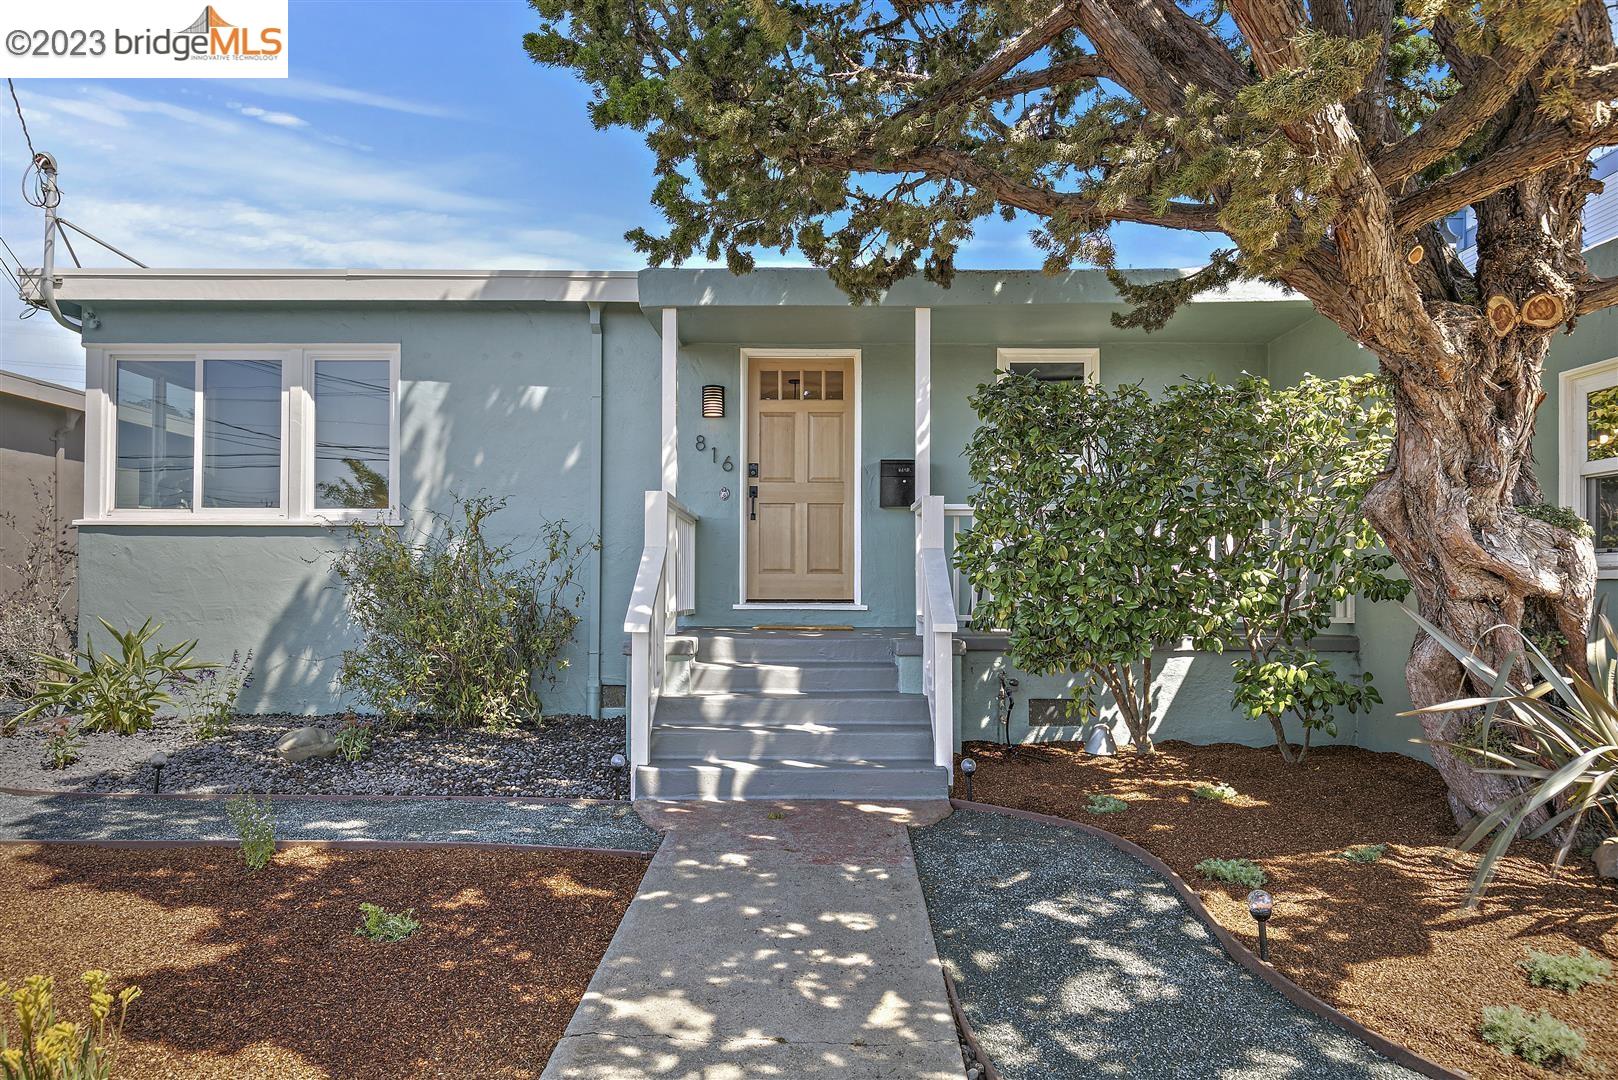 Nestled in the heart of El Cerrito, this delightful property located in the Boulevard Gardens neighborhood invites you to experience the perfect blend of comfort and natural beauty. With 2 bd/1ba, set upon a generous 5,000 square foot lot, this property is a true gem, boasting updated amenities and a garden that promises to enchant. Upon entering this cozy abode, you'll immediately appreciate the warmth and character it exudes. Two bedrooms offer a tranquil retreat, and the updated kitchen and bathroom ensure modern convenience. The backyard provides you with your very own lush garden adorned with fruit trees (green apples, figs, Meyer lemons, and more), and colorful flowers, carefully curated to attract and nurture monarch butterflies. This serene outdoor space is perfect for relaxing afternoons, gardening enthusiasts, and anyone who appreciates the beauty of nature right at their doorstep. Situated in the desirable community of El Cerrito, this property offers the best of both worlds – a peaceful suburban haven with easy access to urban conveniences. Enjoy proximity to schools, parks, shopping, dining, and excellent transportation options. 816 Norvell St is more than just a house; it's a place where comfort meets nature.